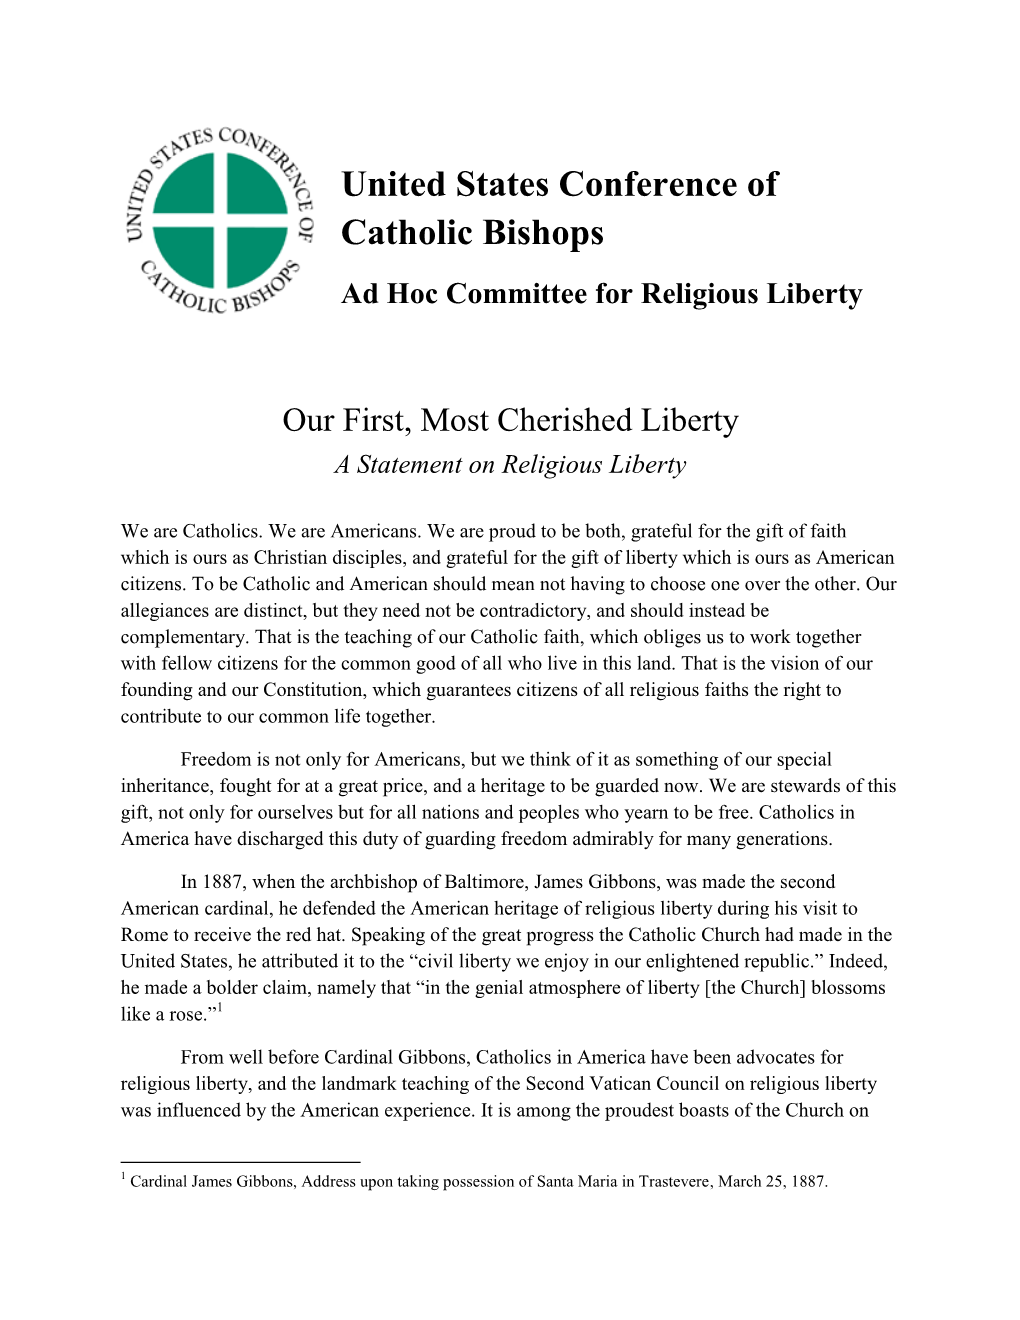 Our First, Most Cherished Liberty a Statement on Religious Liberty